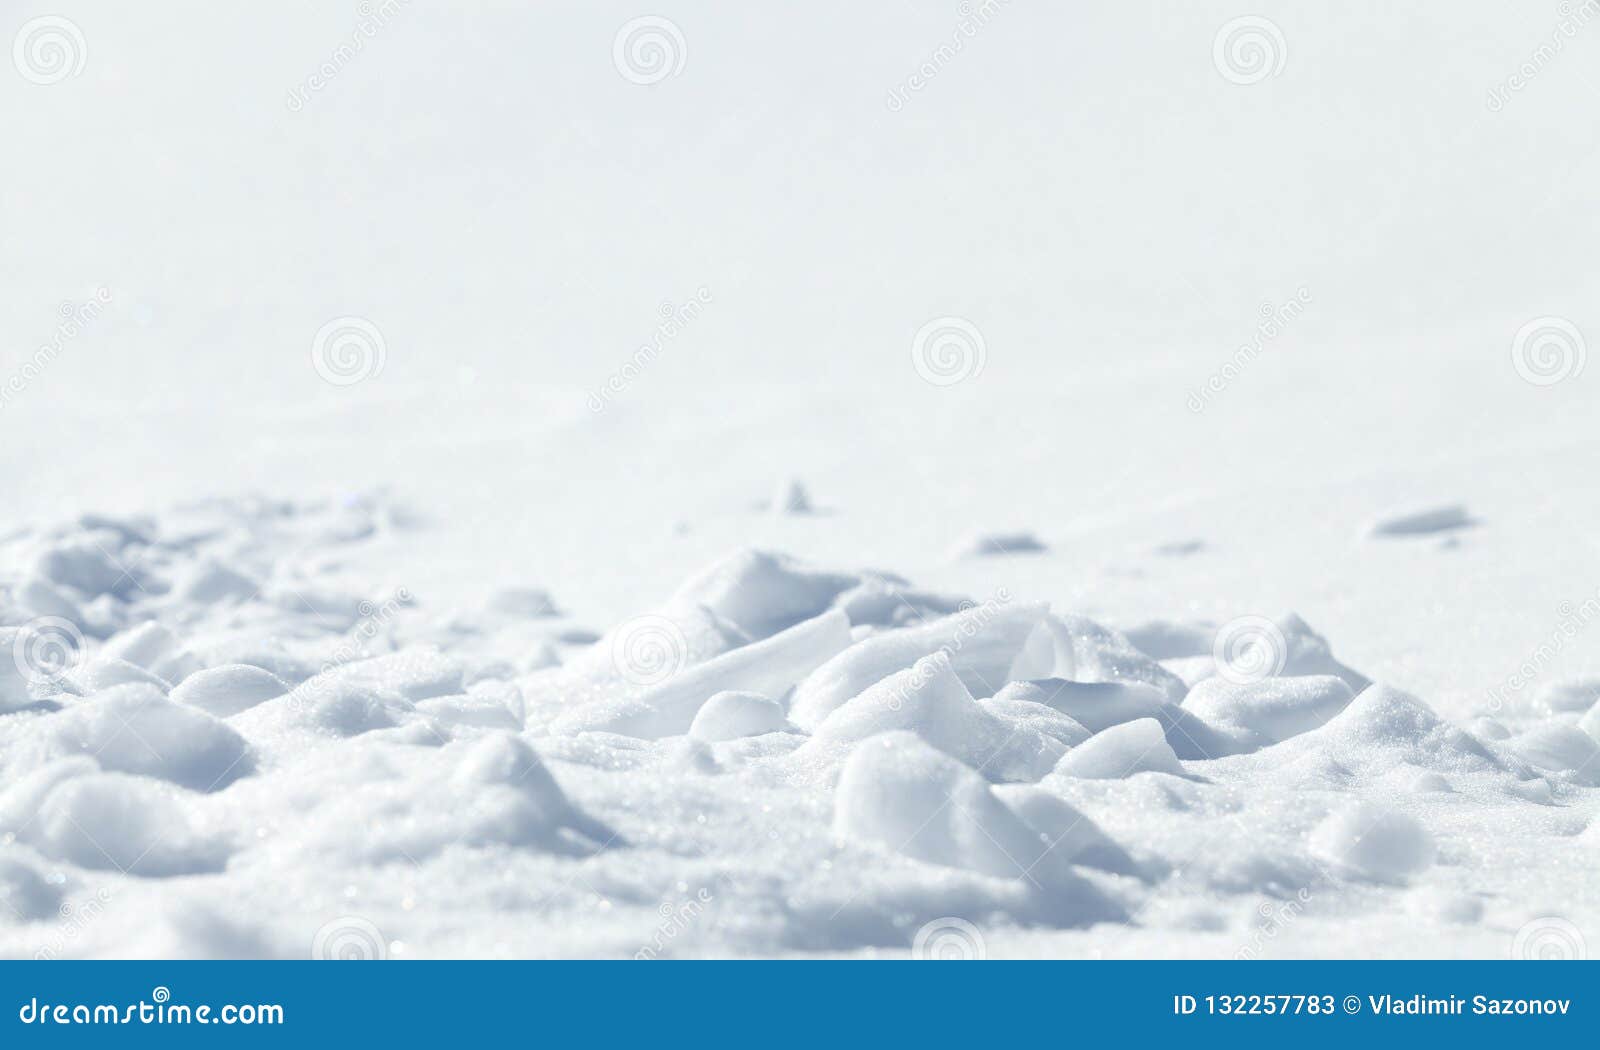 Natural Winter Background with Snow. Snowy White Background Stock Image -  Image of background, rime: 132257783